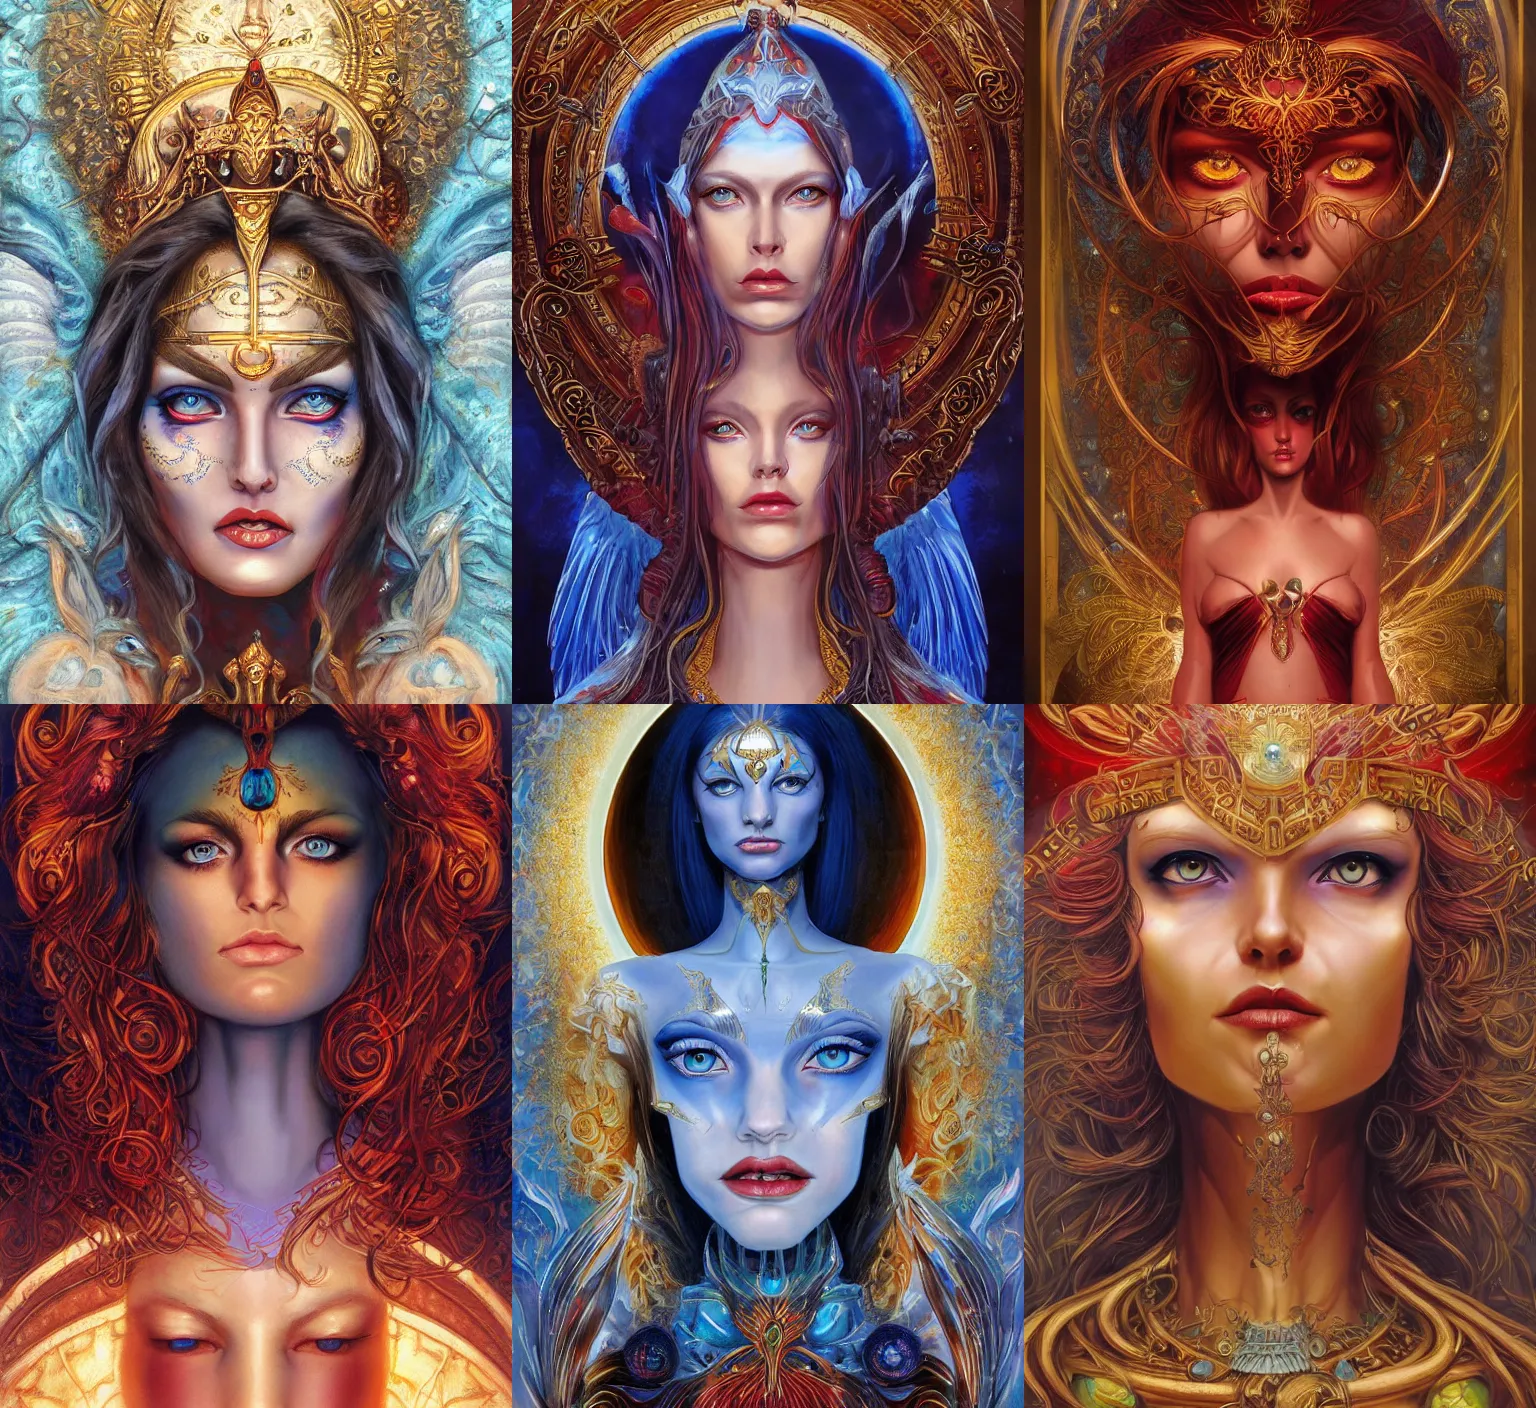 Prompt: stunning goddess of life portrait, clear blue eyes. realistic, symmetrical face. deep red and gold background. art by bowater charlie, mark brooks, julie bell, arian mark, tony sandoval